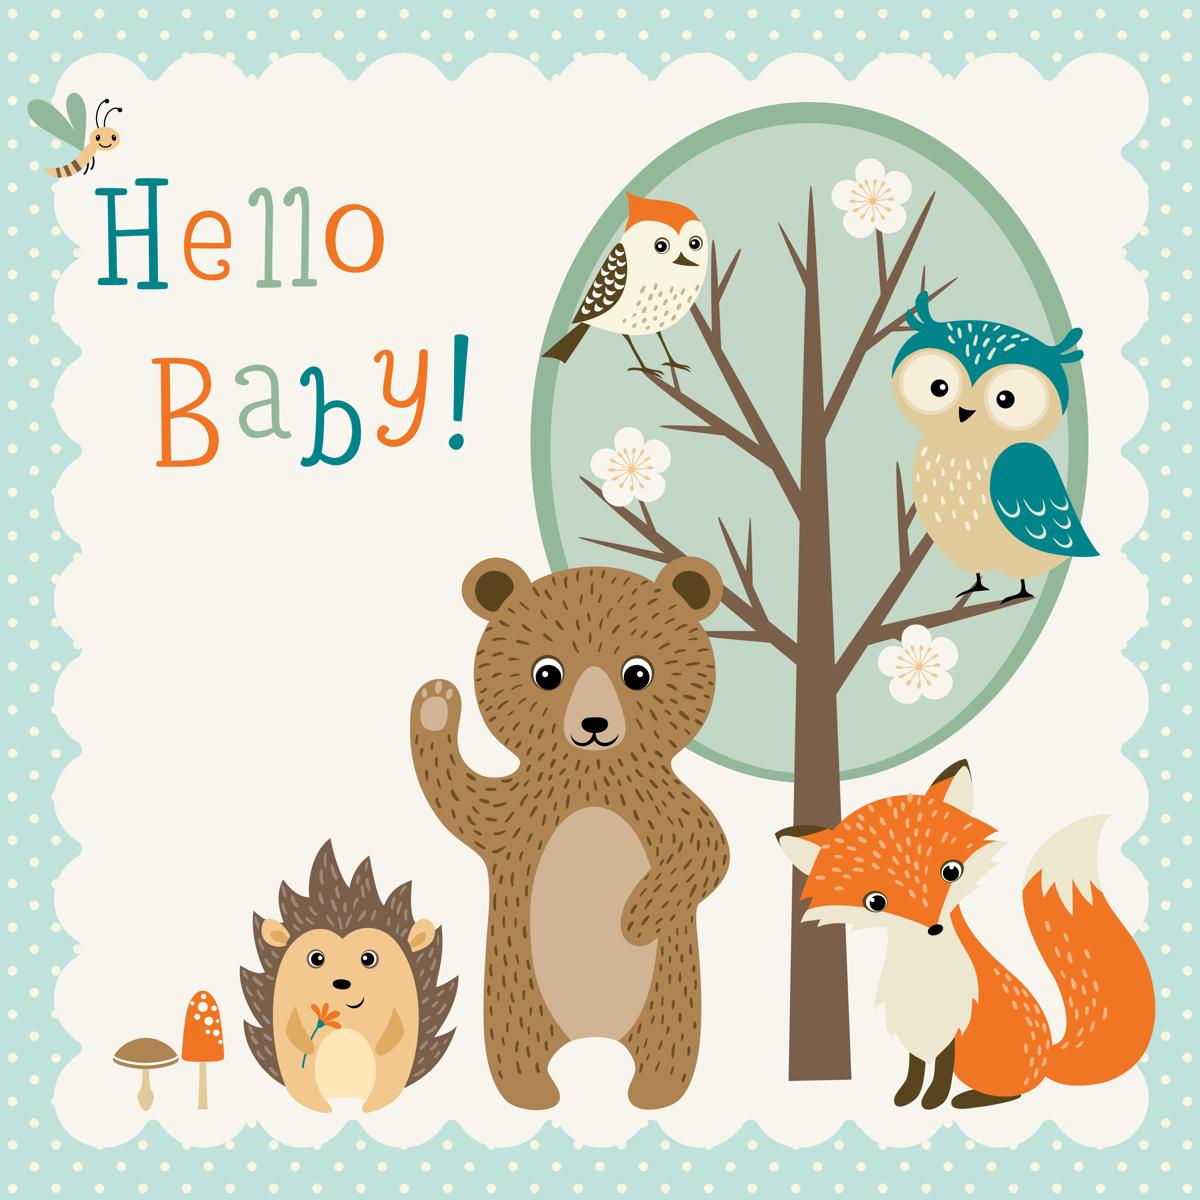 Full Size of Baby Shower:graceful Baby Shower Cards Image Designs Baby Shower Gifts With Diy Baby Shower Gifts Plus Baby Shower Activities Together With Baby Shower Gifts For Boys As Well As Mi Baby Shower And Baby Shower Congratulations